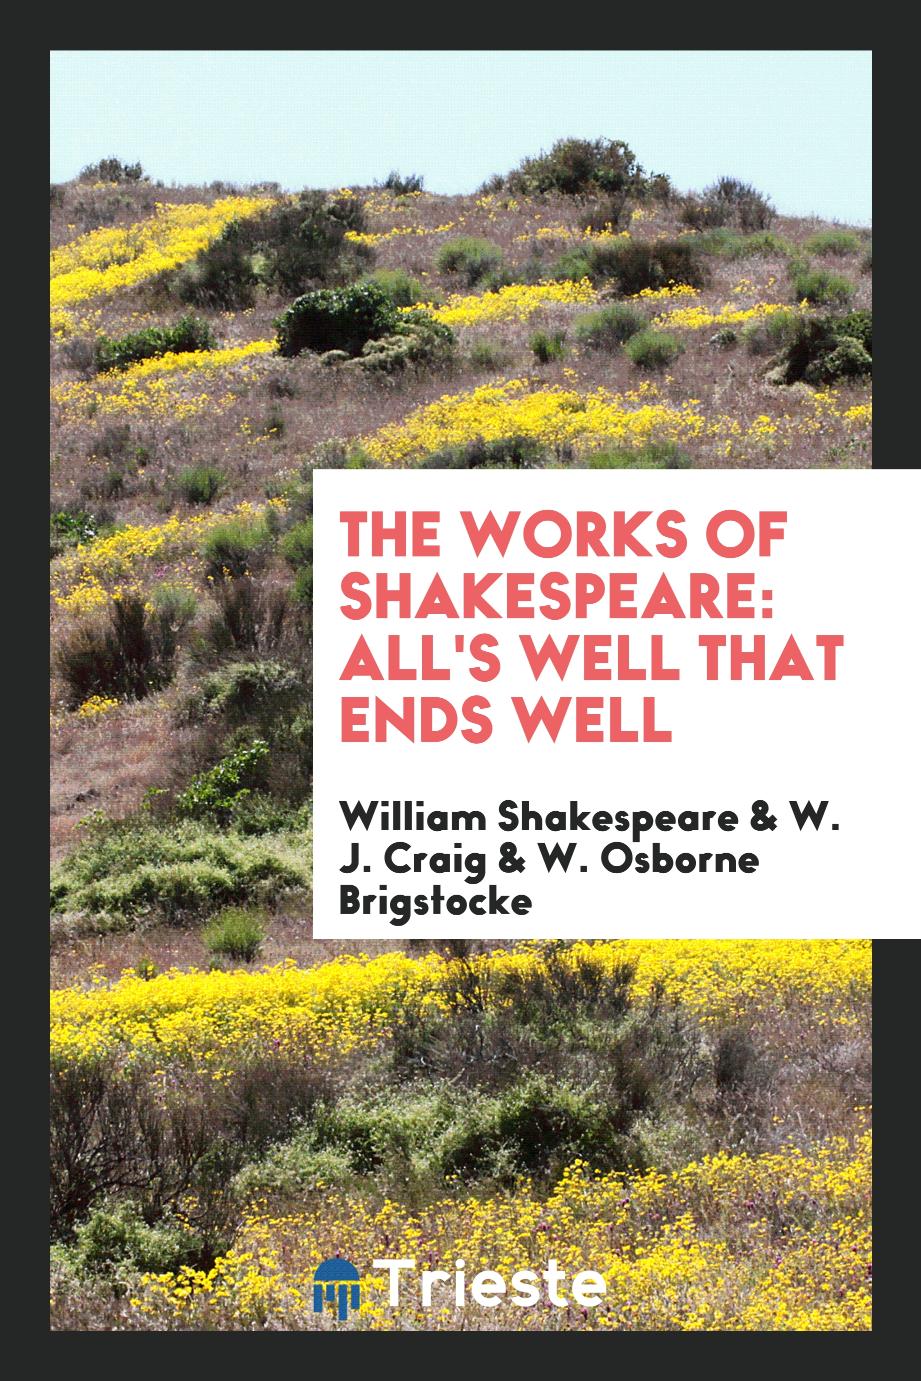 The Works of Shakespeare: All's Well That Ends Well